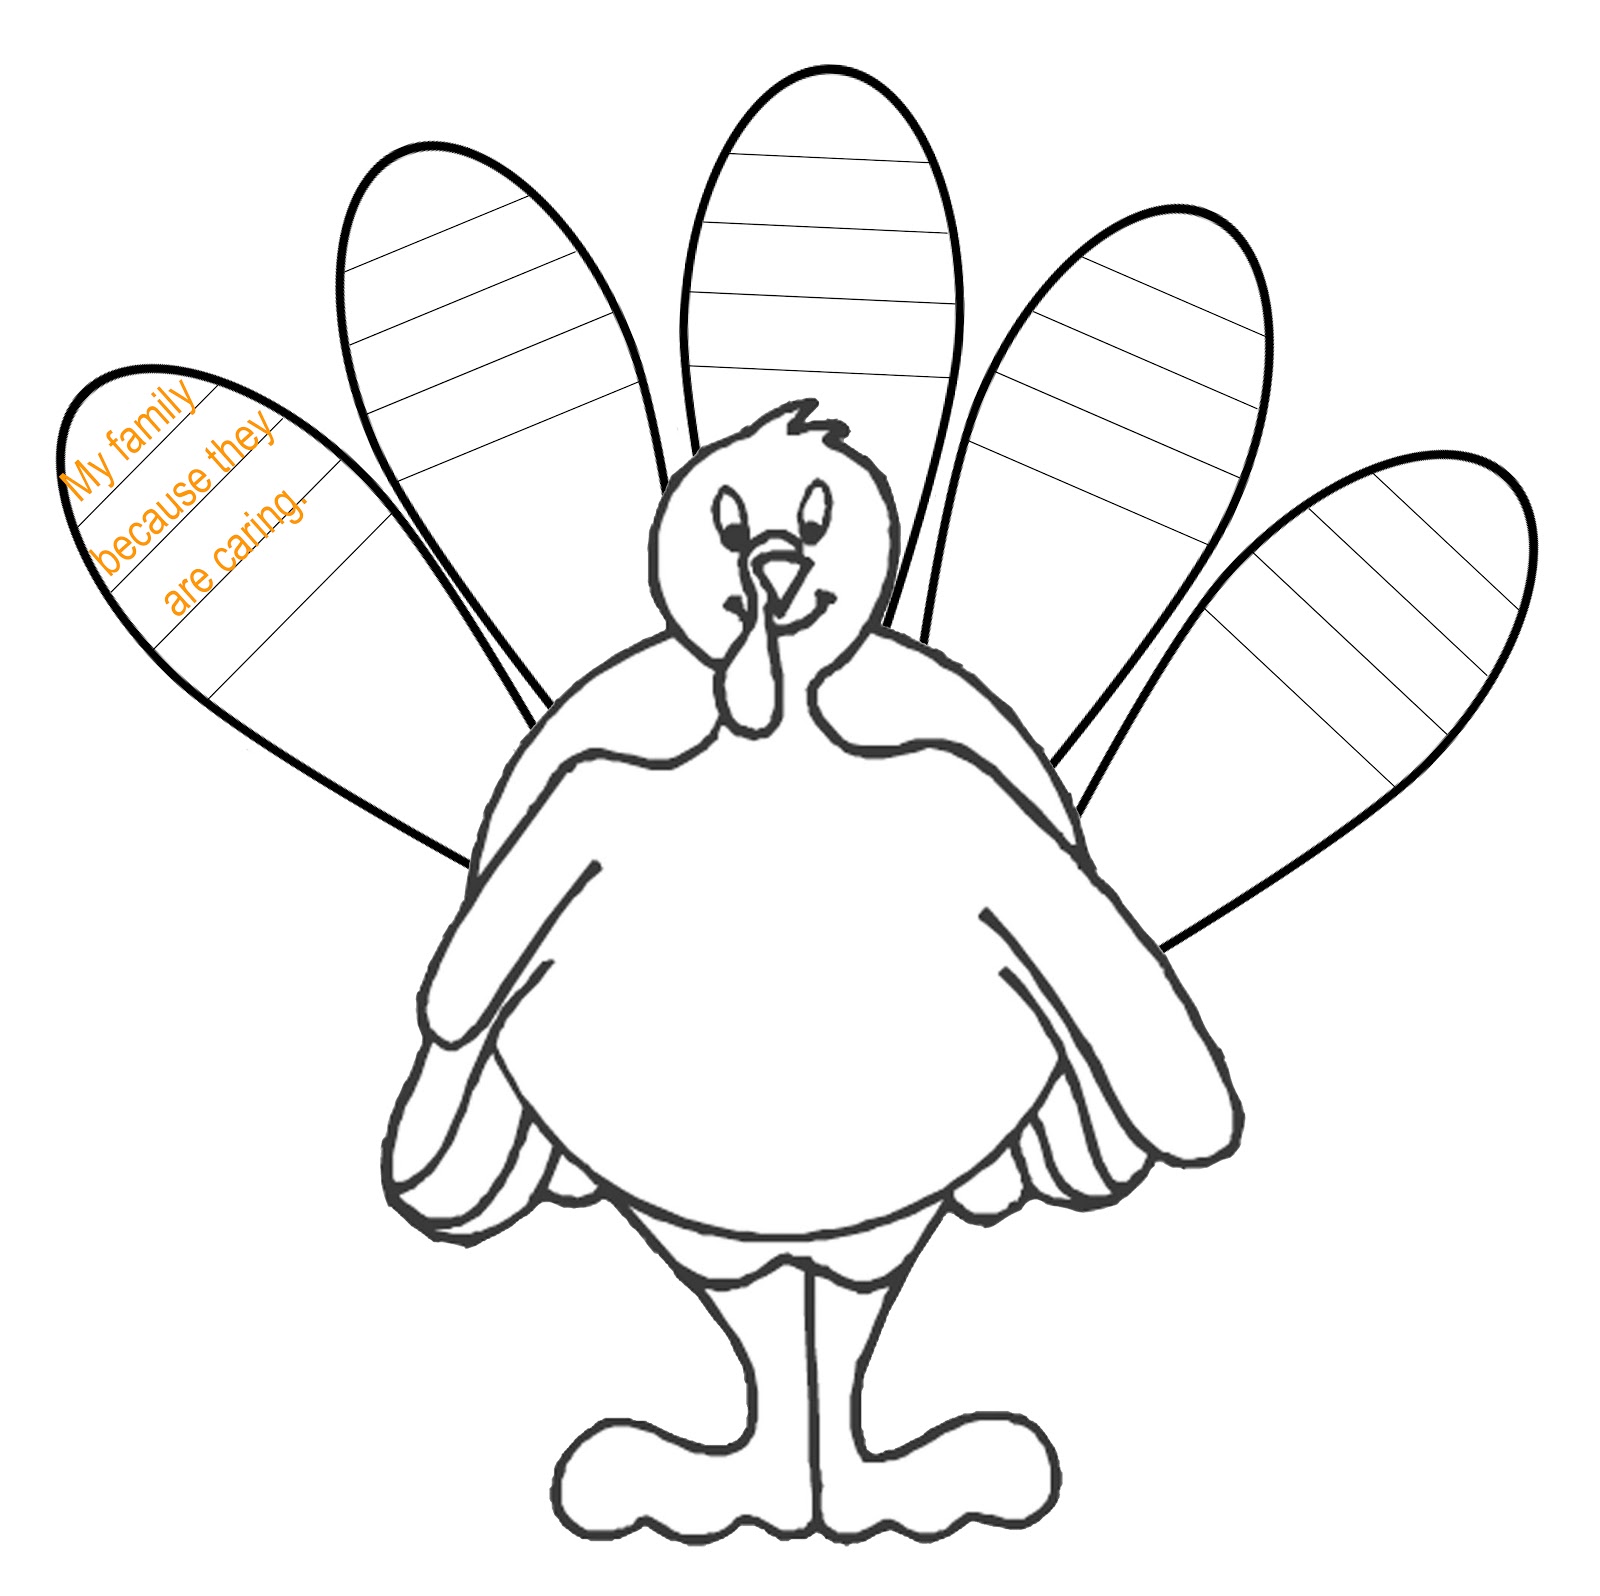 Images For > Turkey Feathers Coloring Pages